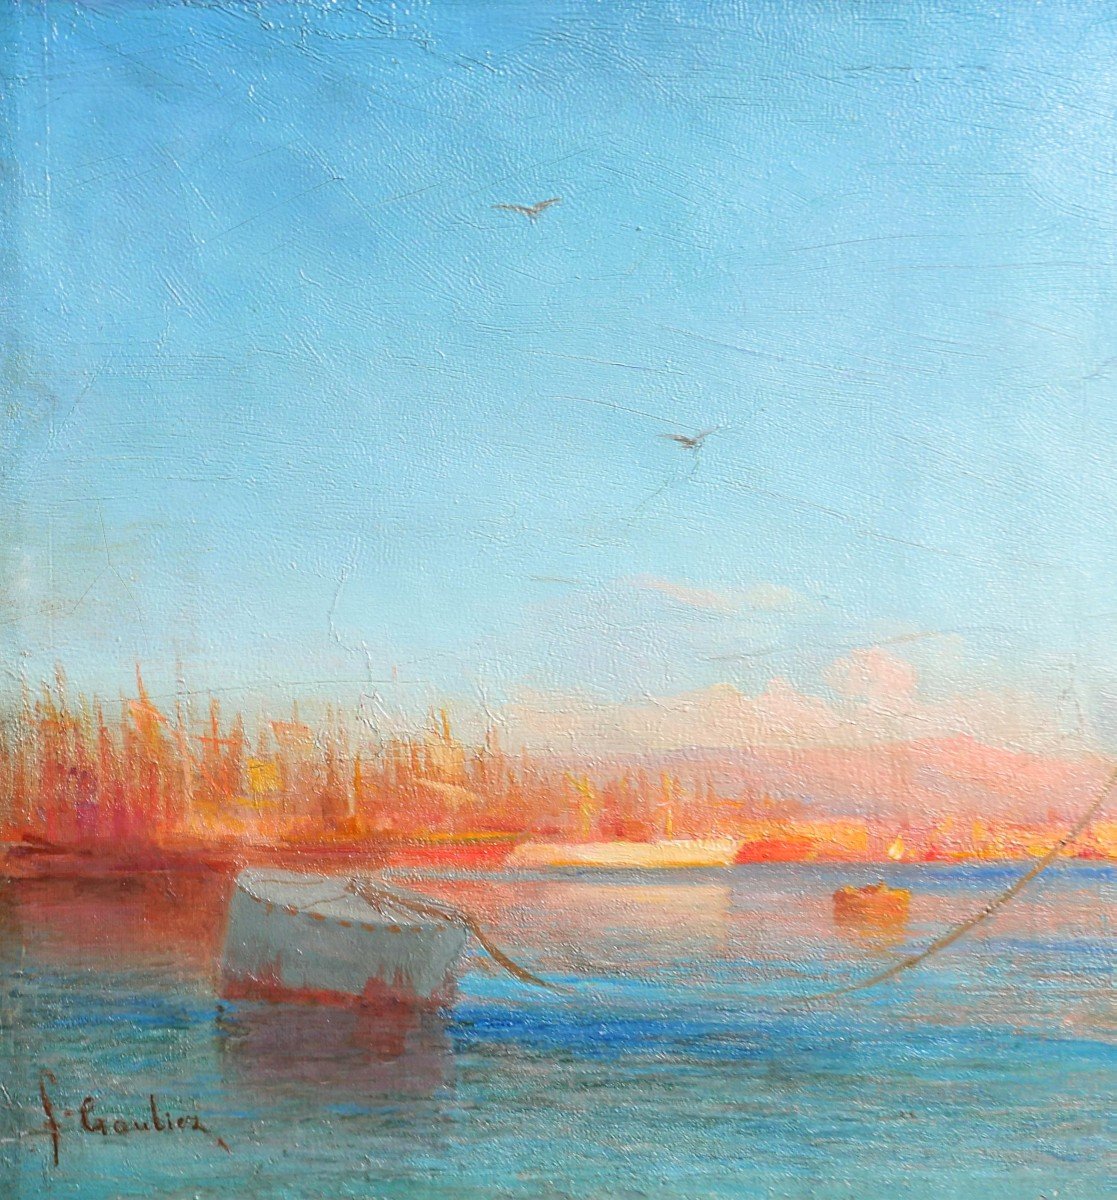 François Gautier (1842-1917) Boats In The Port, Painting, Circa 1890-photo-3